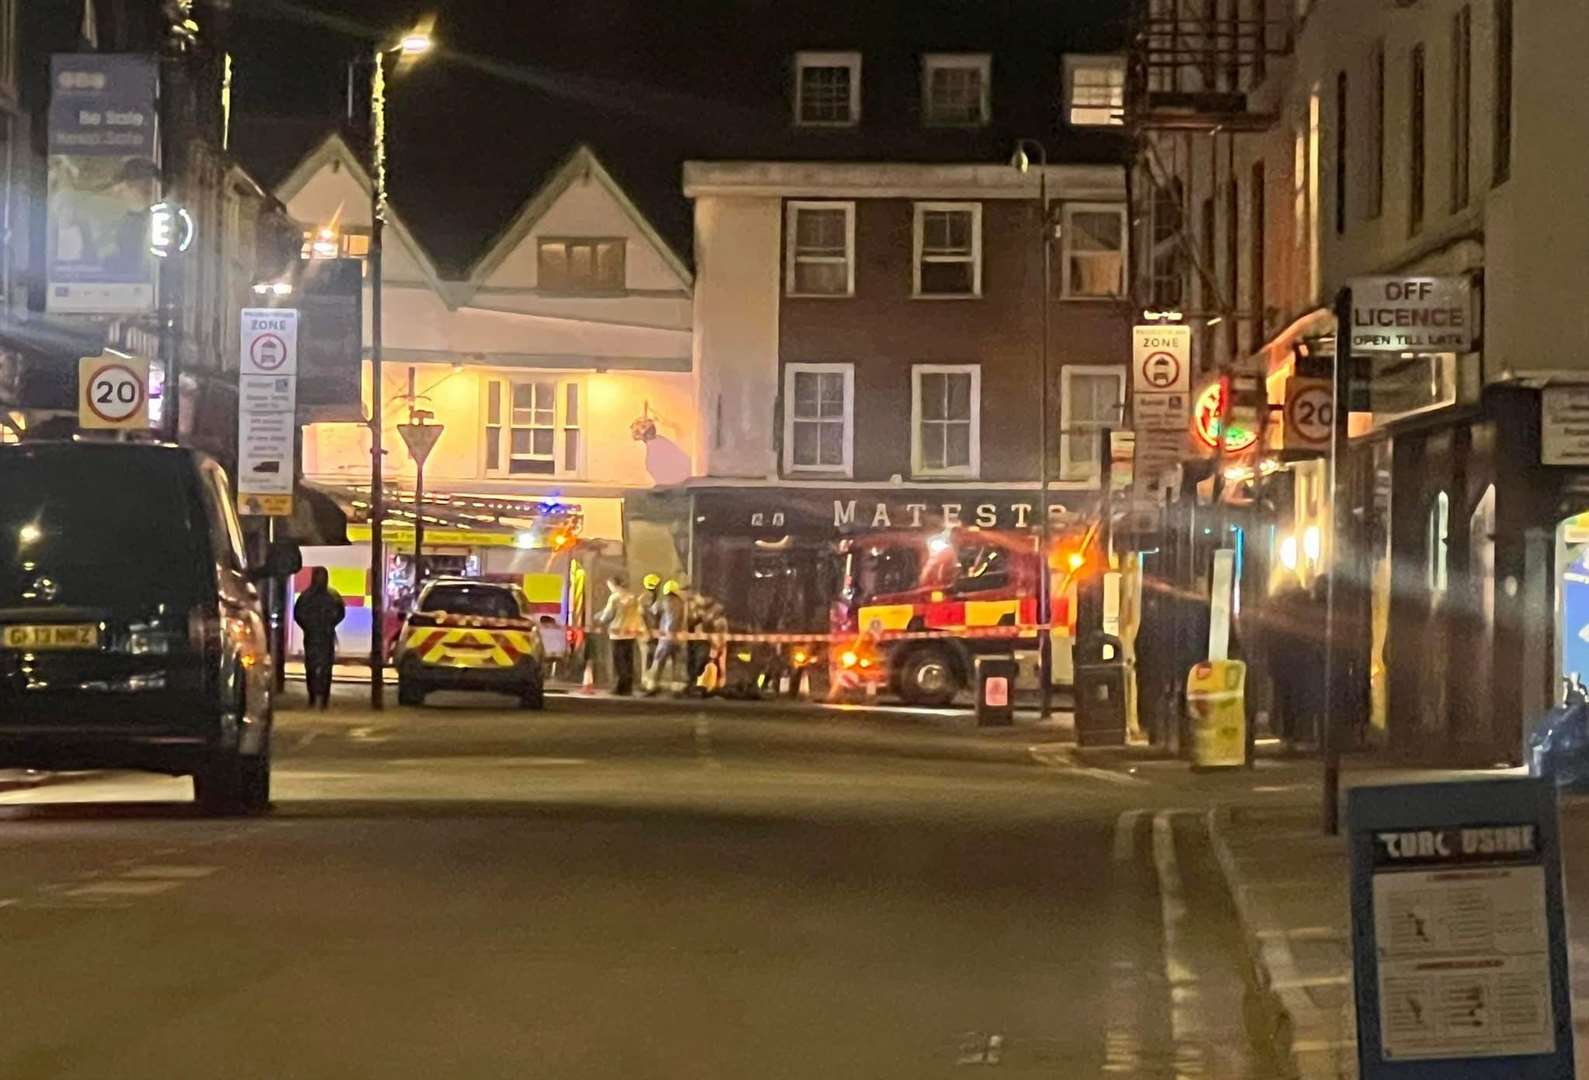 The scene of the pub fire in Maidstone high street. Picture: Russ Talliss